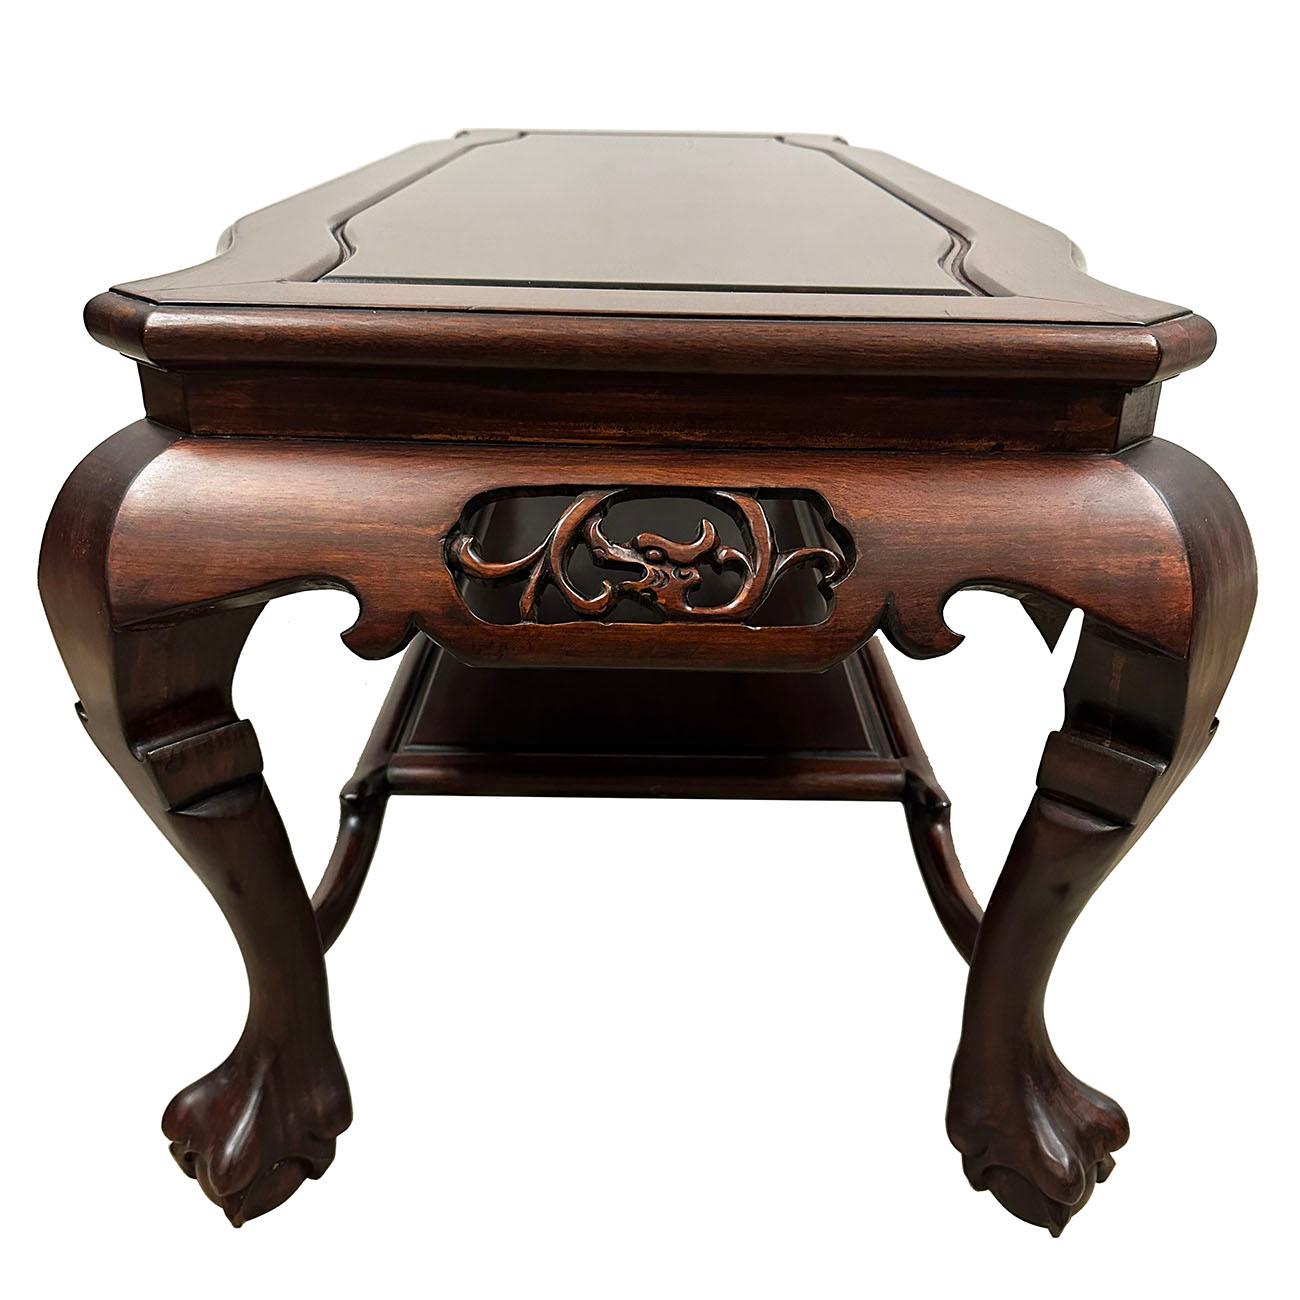 Chinese Export Vintage Chinese Rosewood Carved Coffee Table with Dragon Motif For Sale